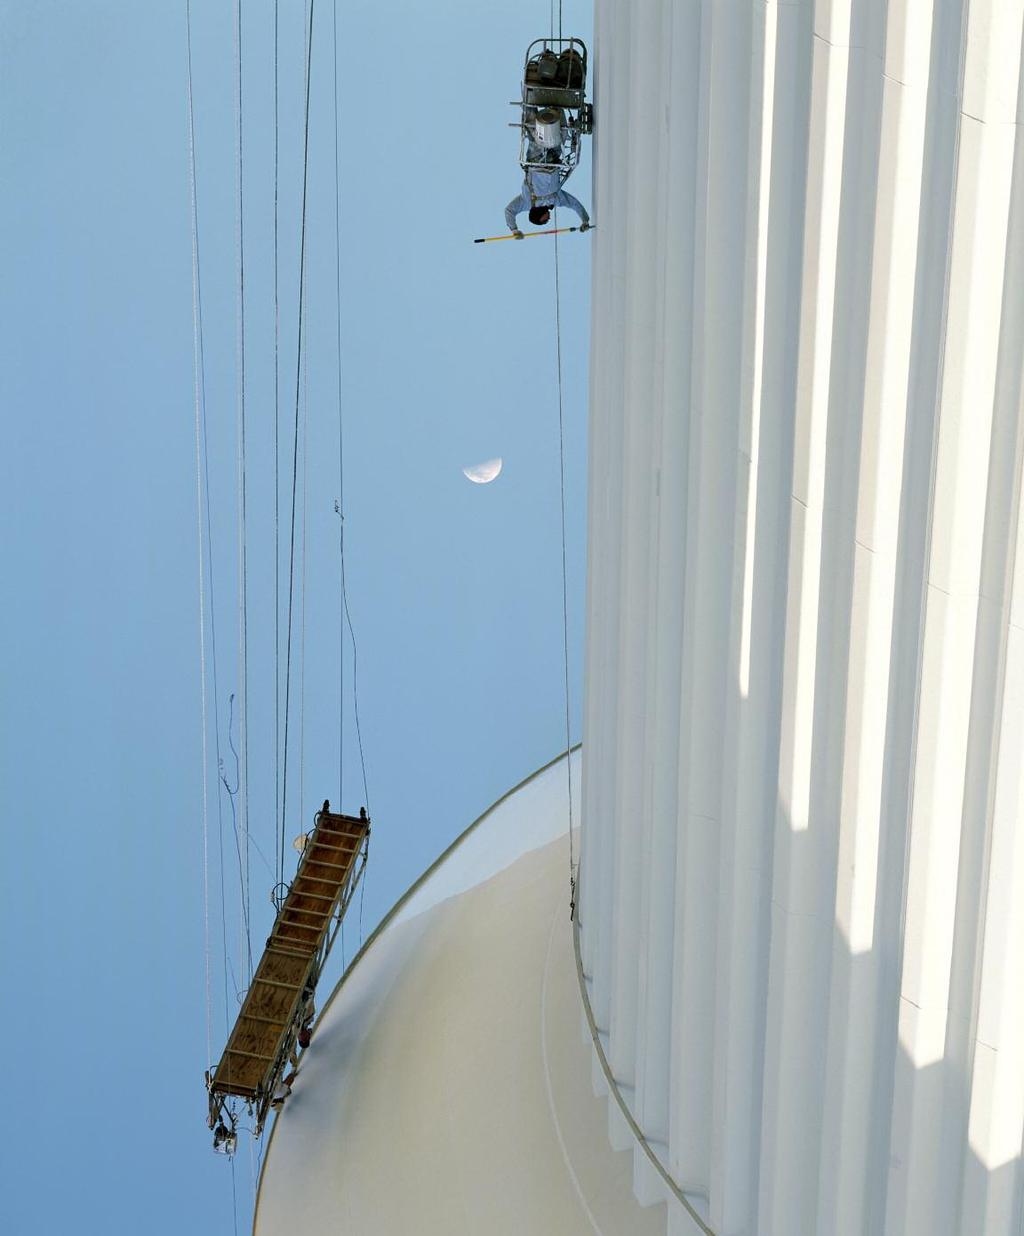 ALUMIGLASS EXTENSION POLES EXTREME REACH. Got a big job to do? Heavy duty Alumiglass can bring it down to size.